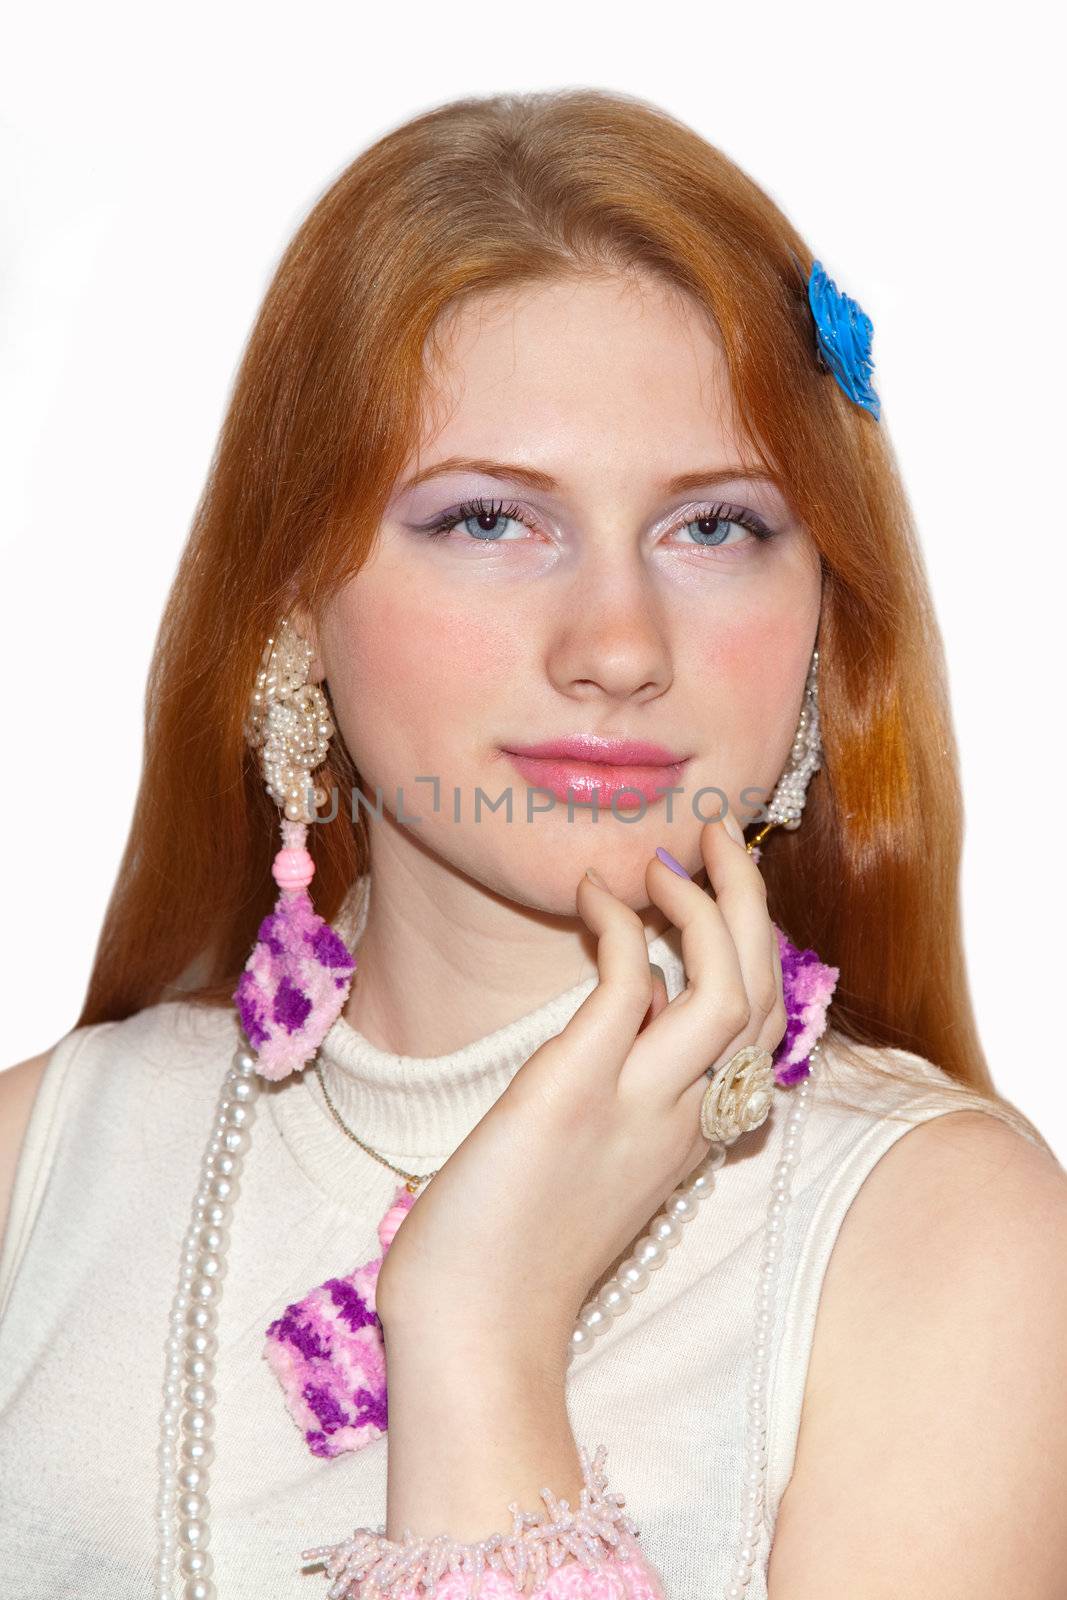 Redhead girl showing jewelry. Portrait on white background